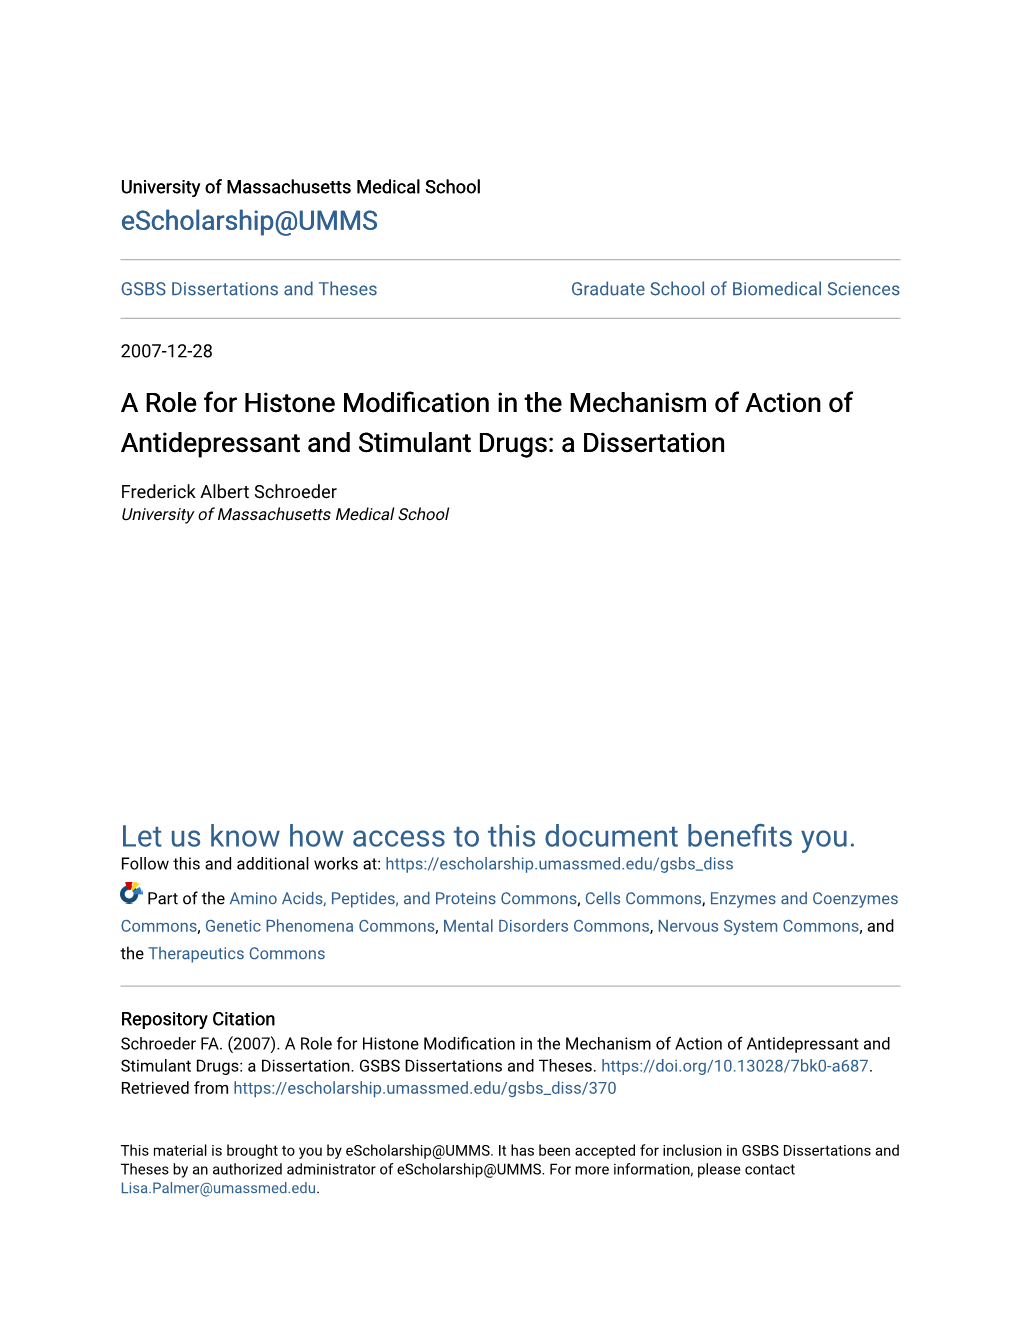 A Role for Histone Modification in the Mechanism of Action of Antidepressant and Stimulant Drugs: a Dissertation